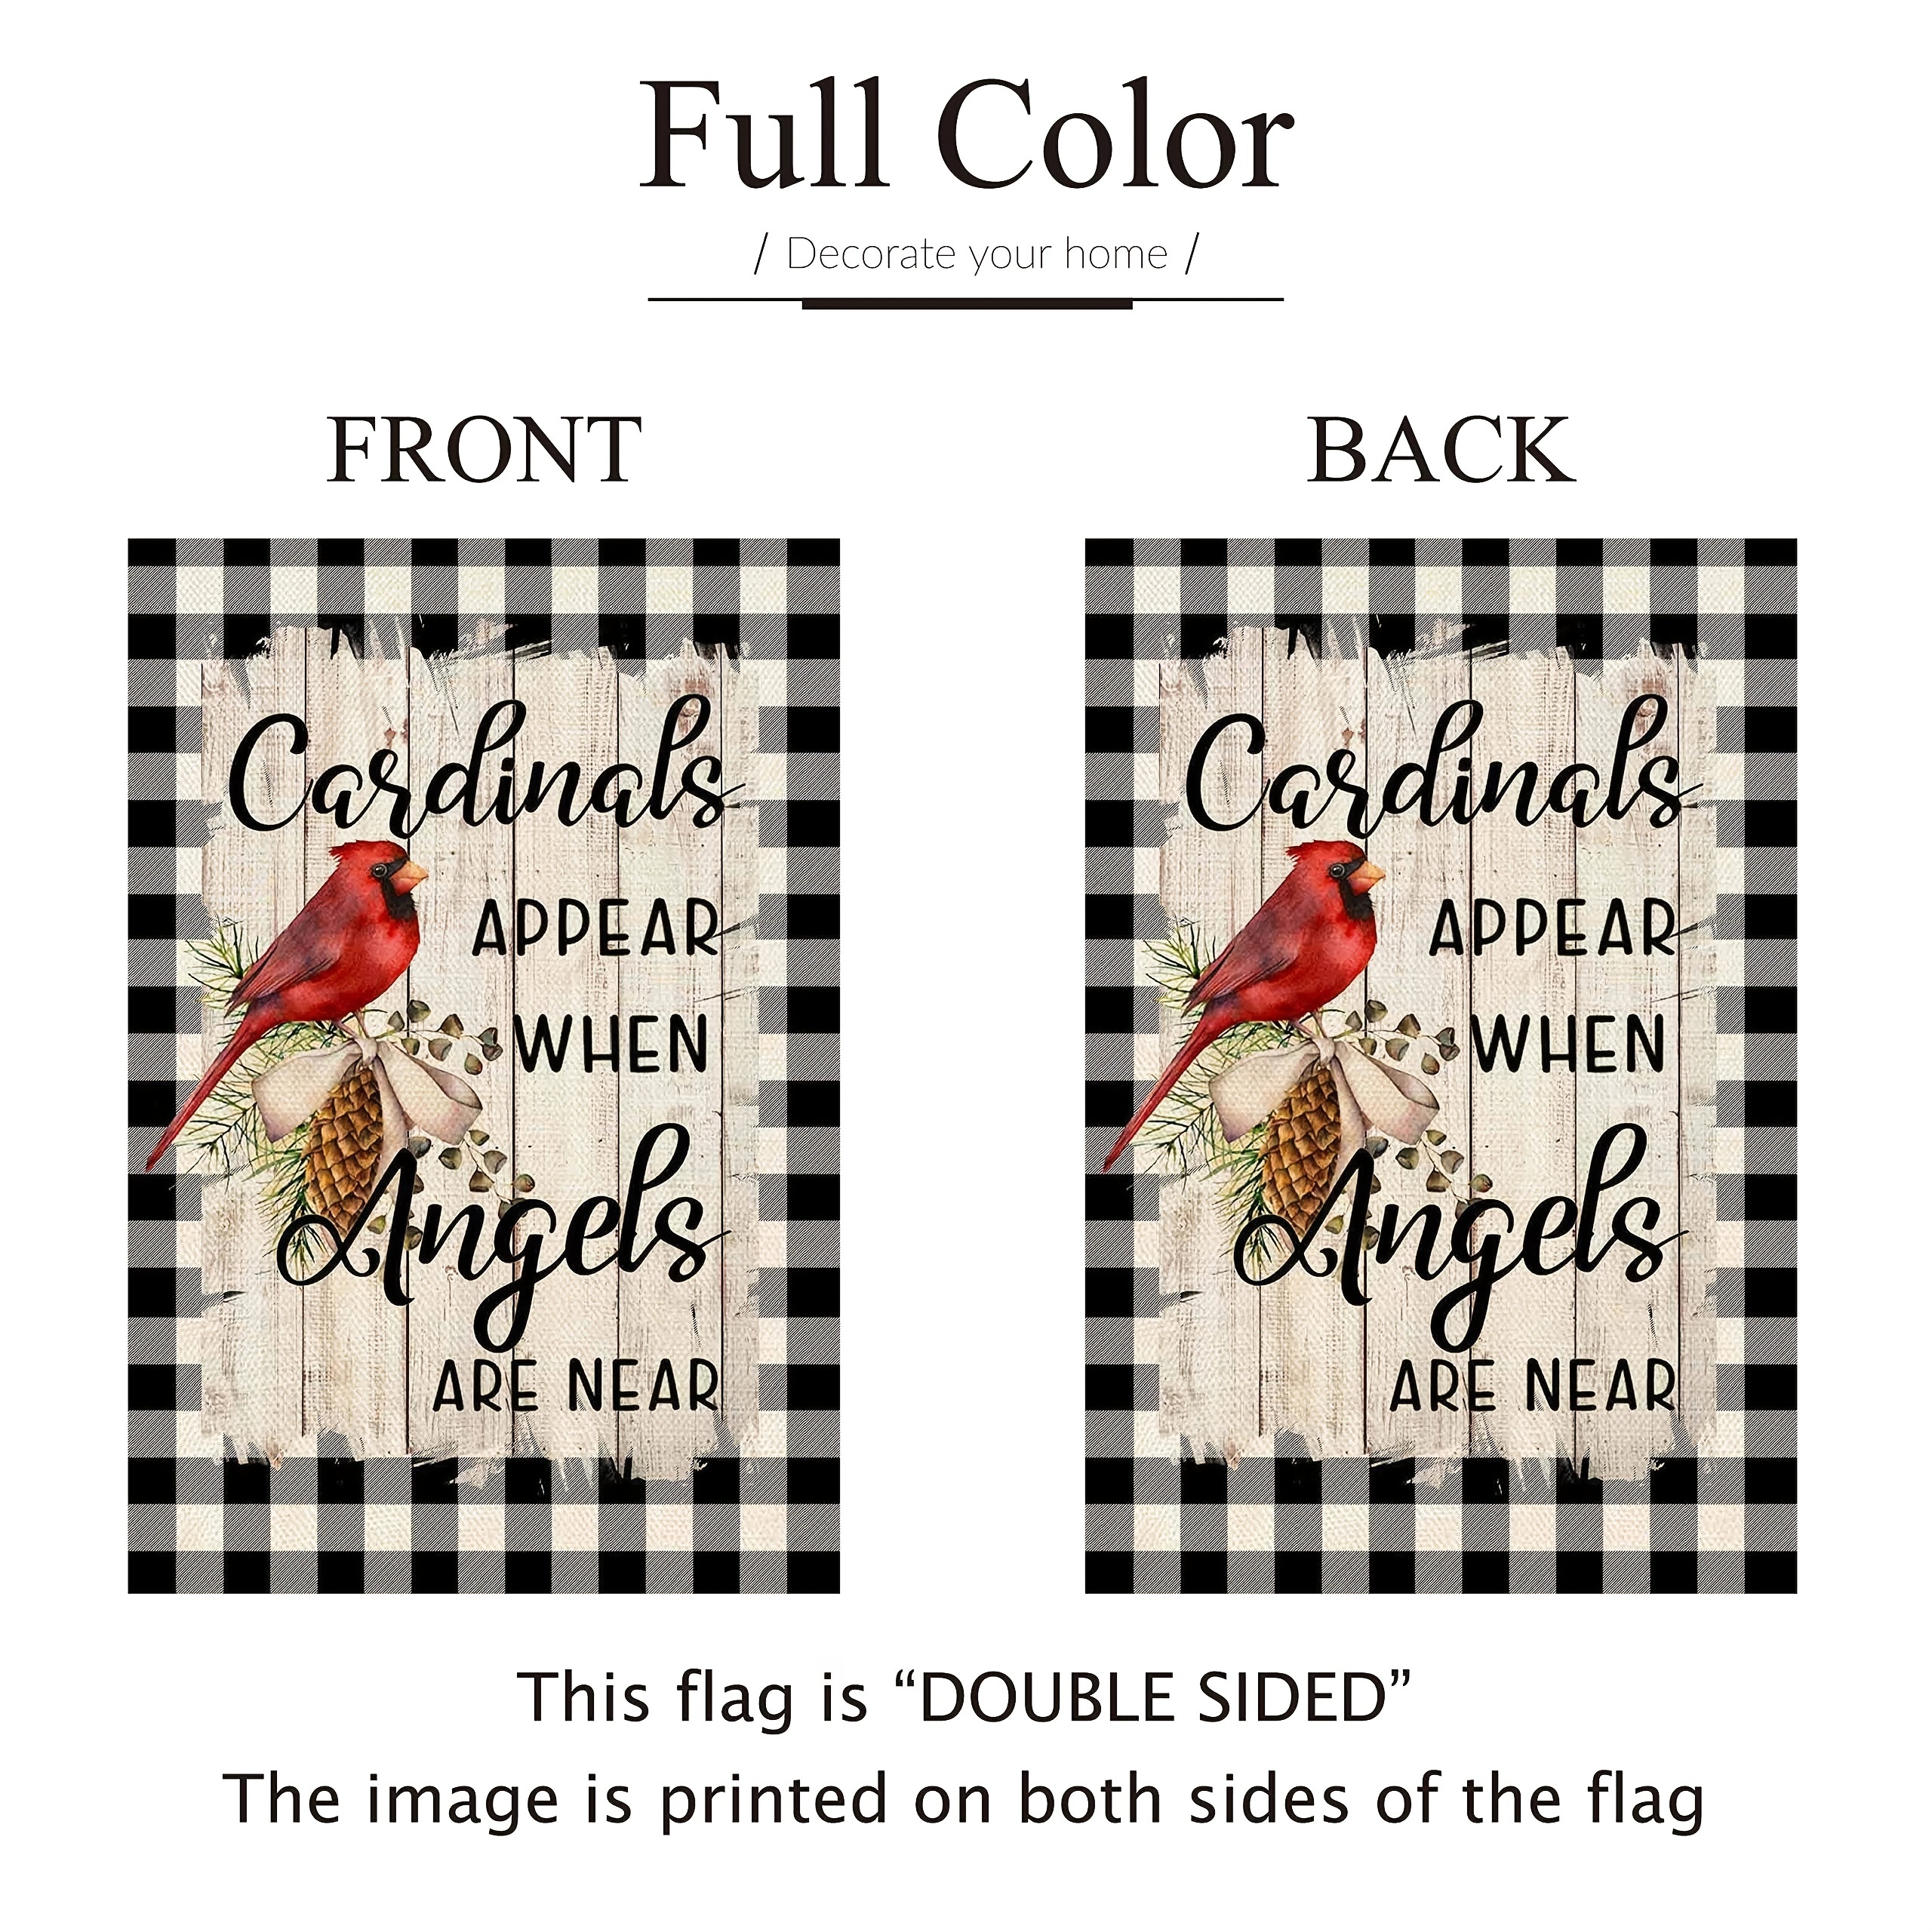 1pc winter decorative garden flag double sided red bird snowflake quote memorial gift outdoor small decor christmas farmhouse home outside decoration no flagpole 12x18 inches details 4